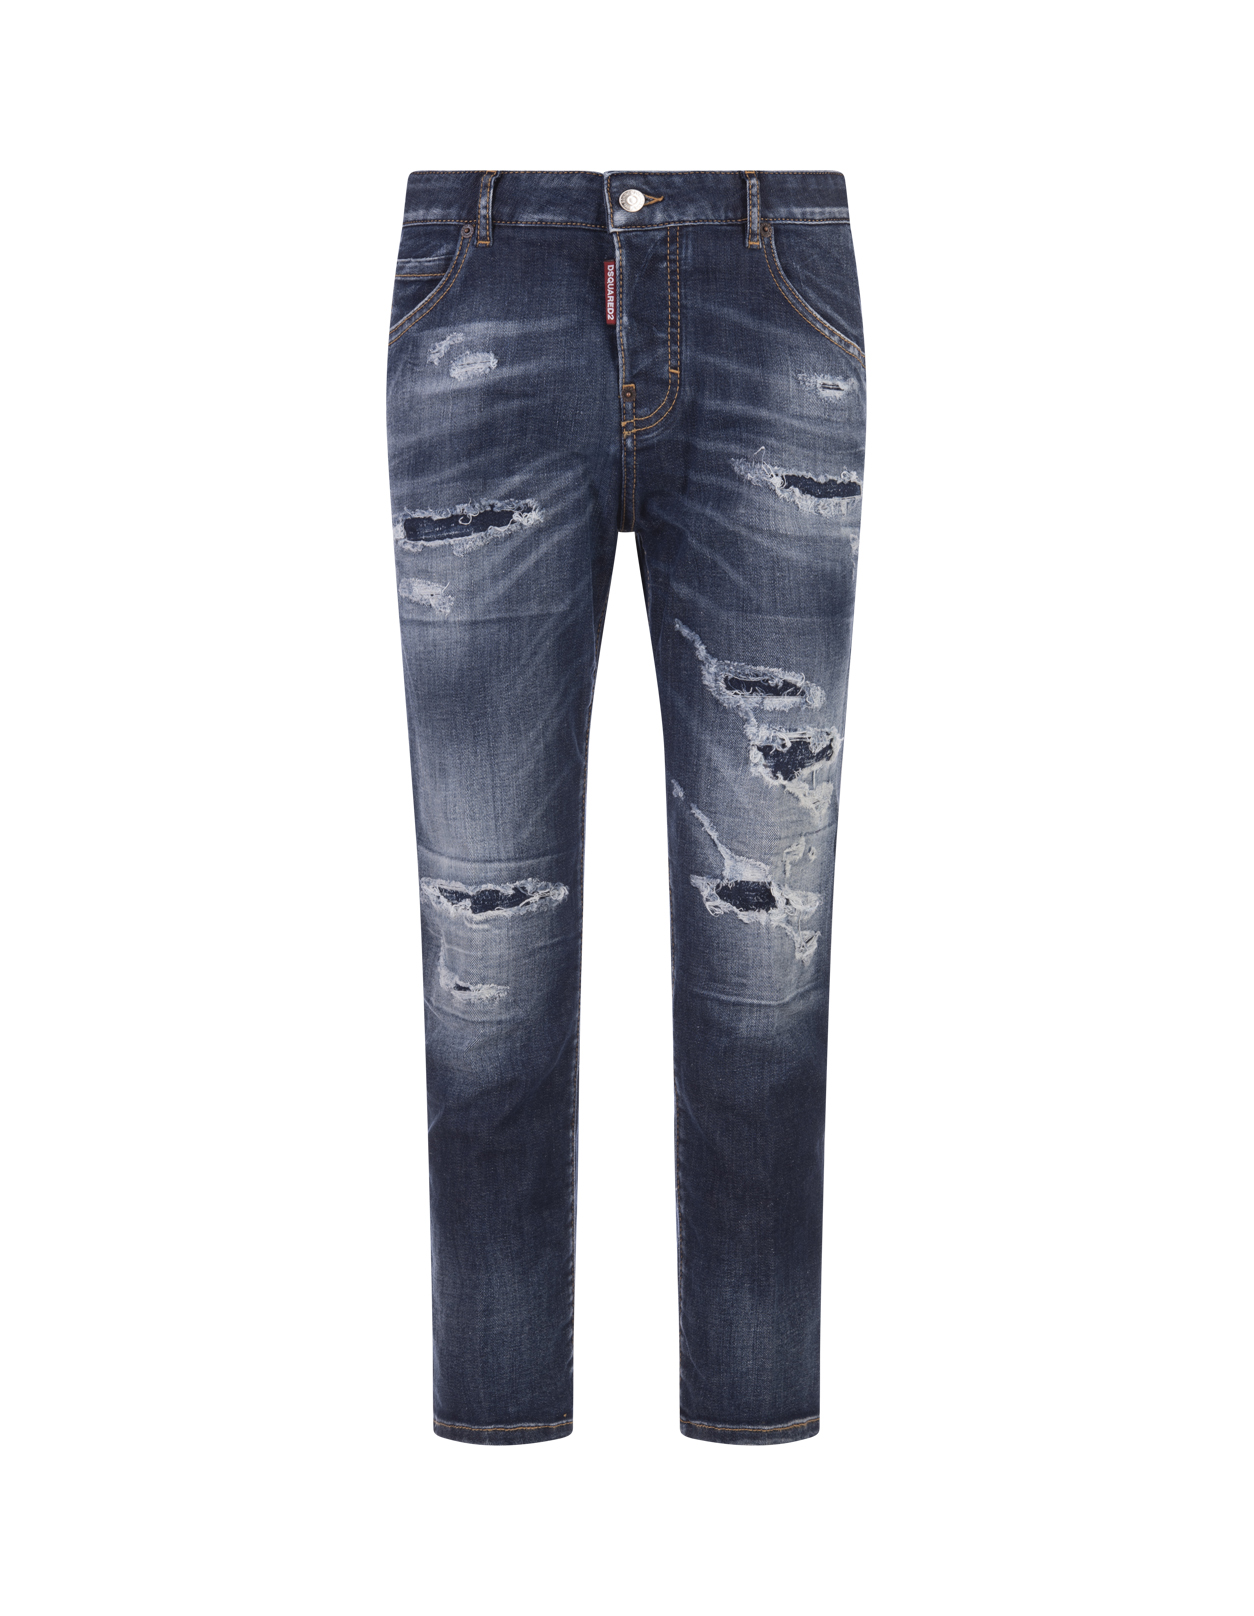 S.S. Medium Ripped Wash Cool Girl Cropped Jeans DSQUARED2 | S72LB0663-S30789470